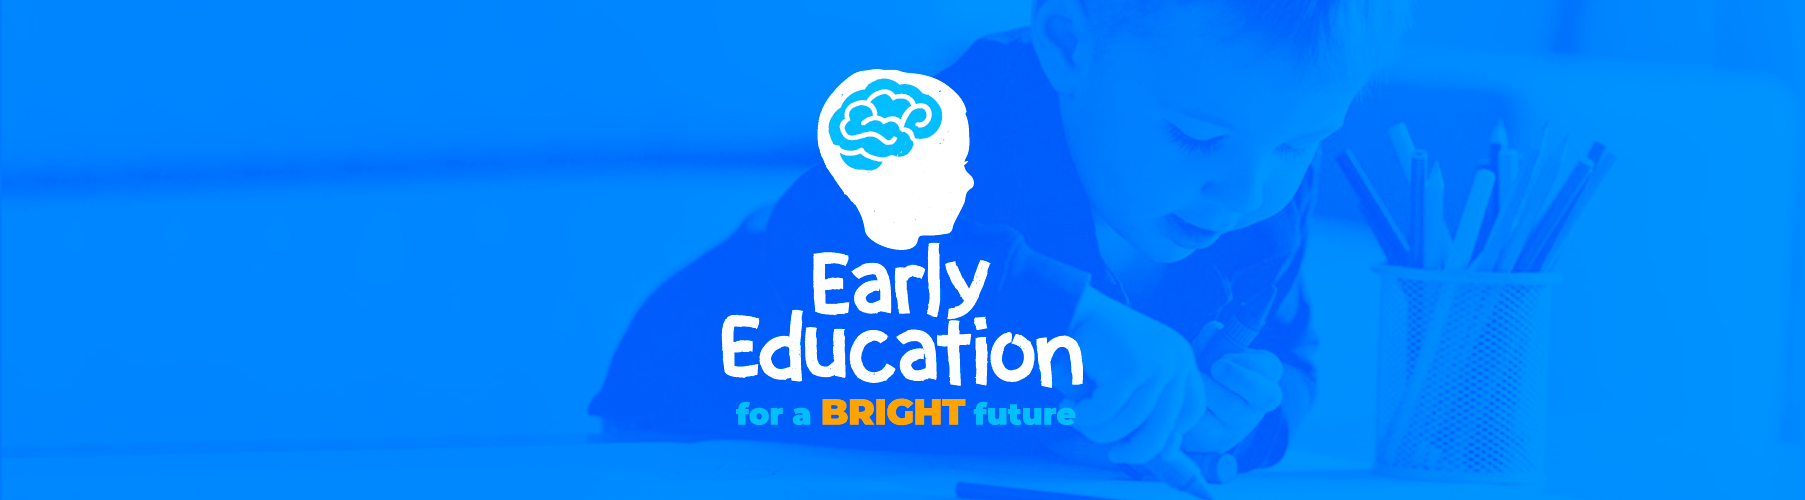 Early Education for a Bright future